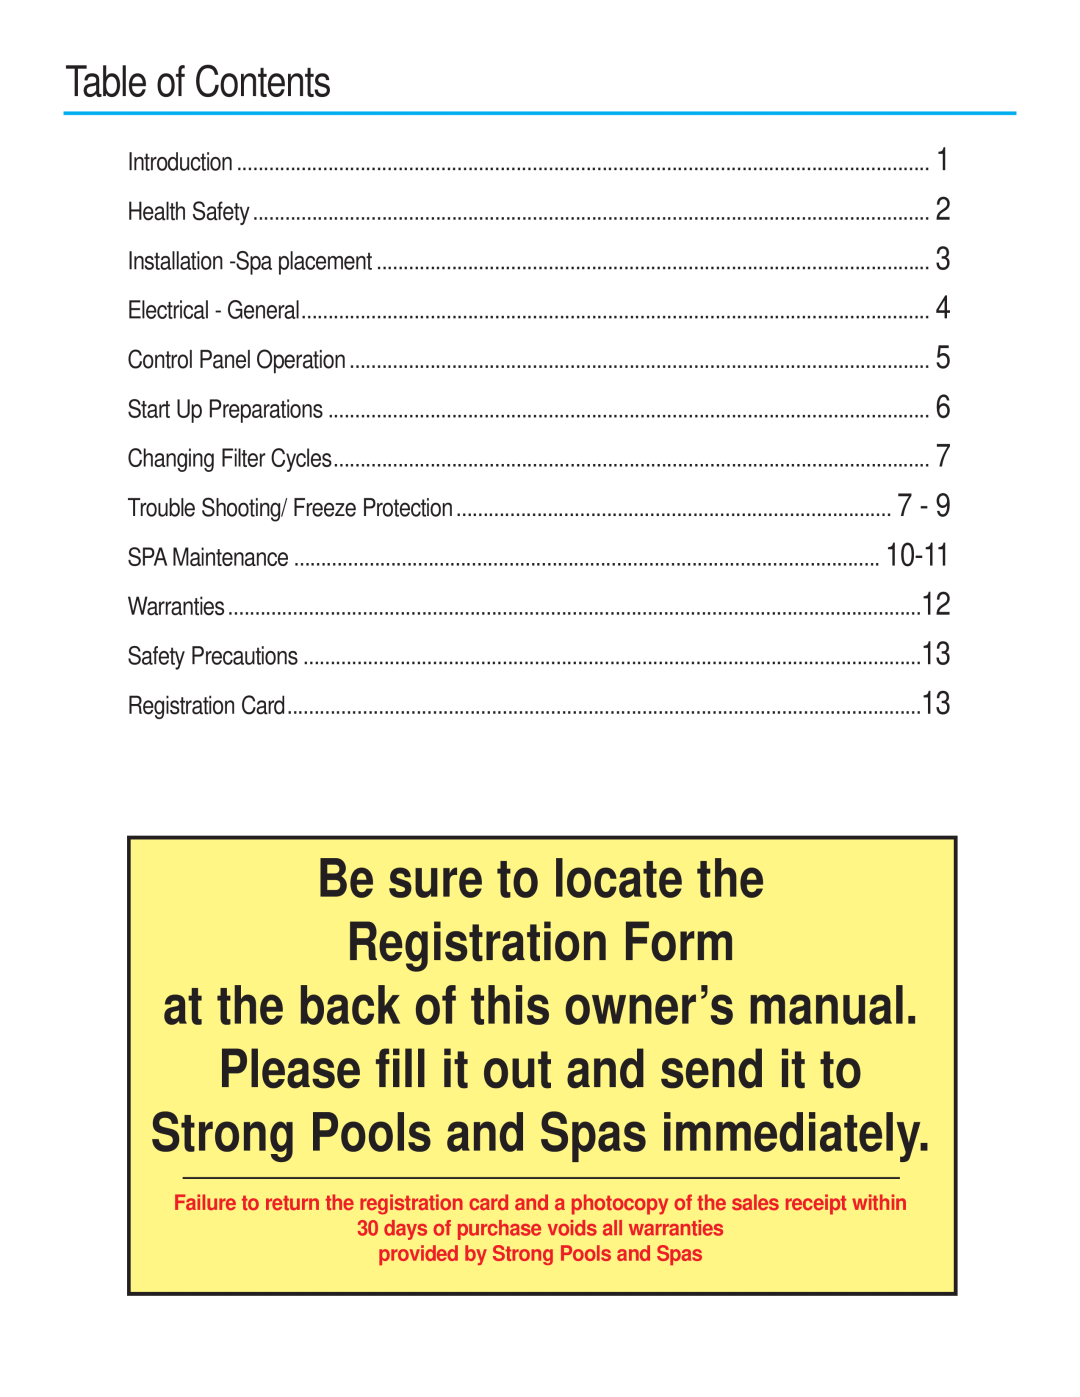 Strong Pools and Spas St. Martin owner manual Table of Contents, Be sure to locate the Registration Form 